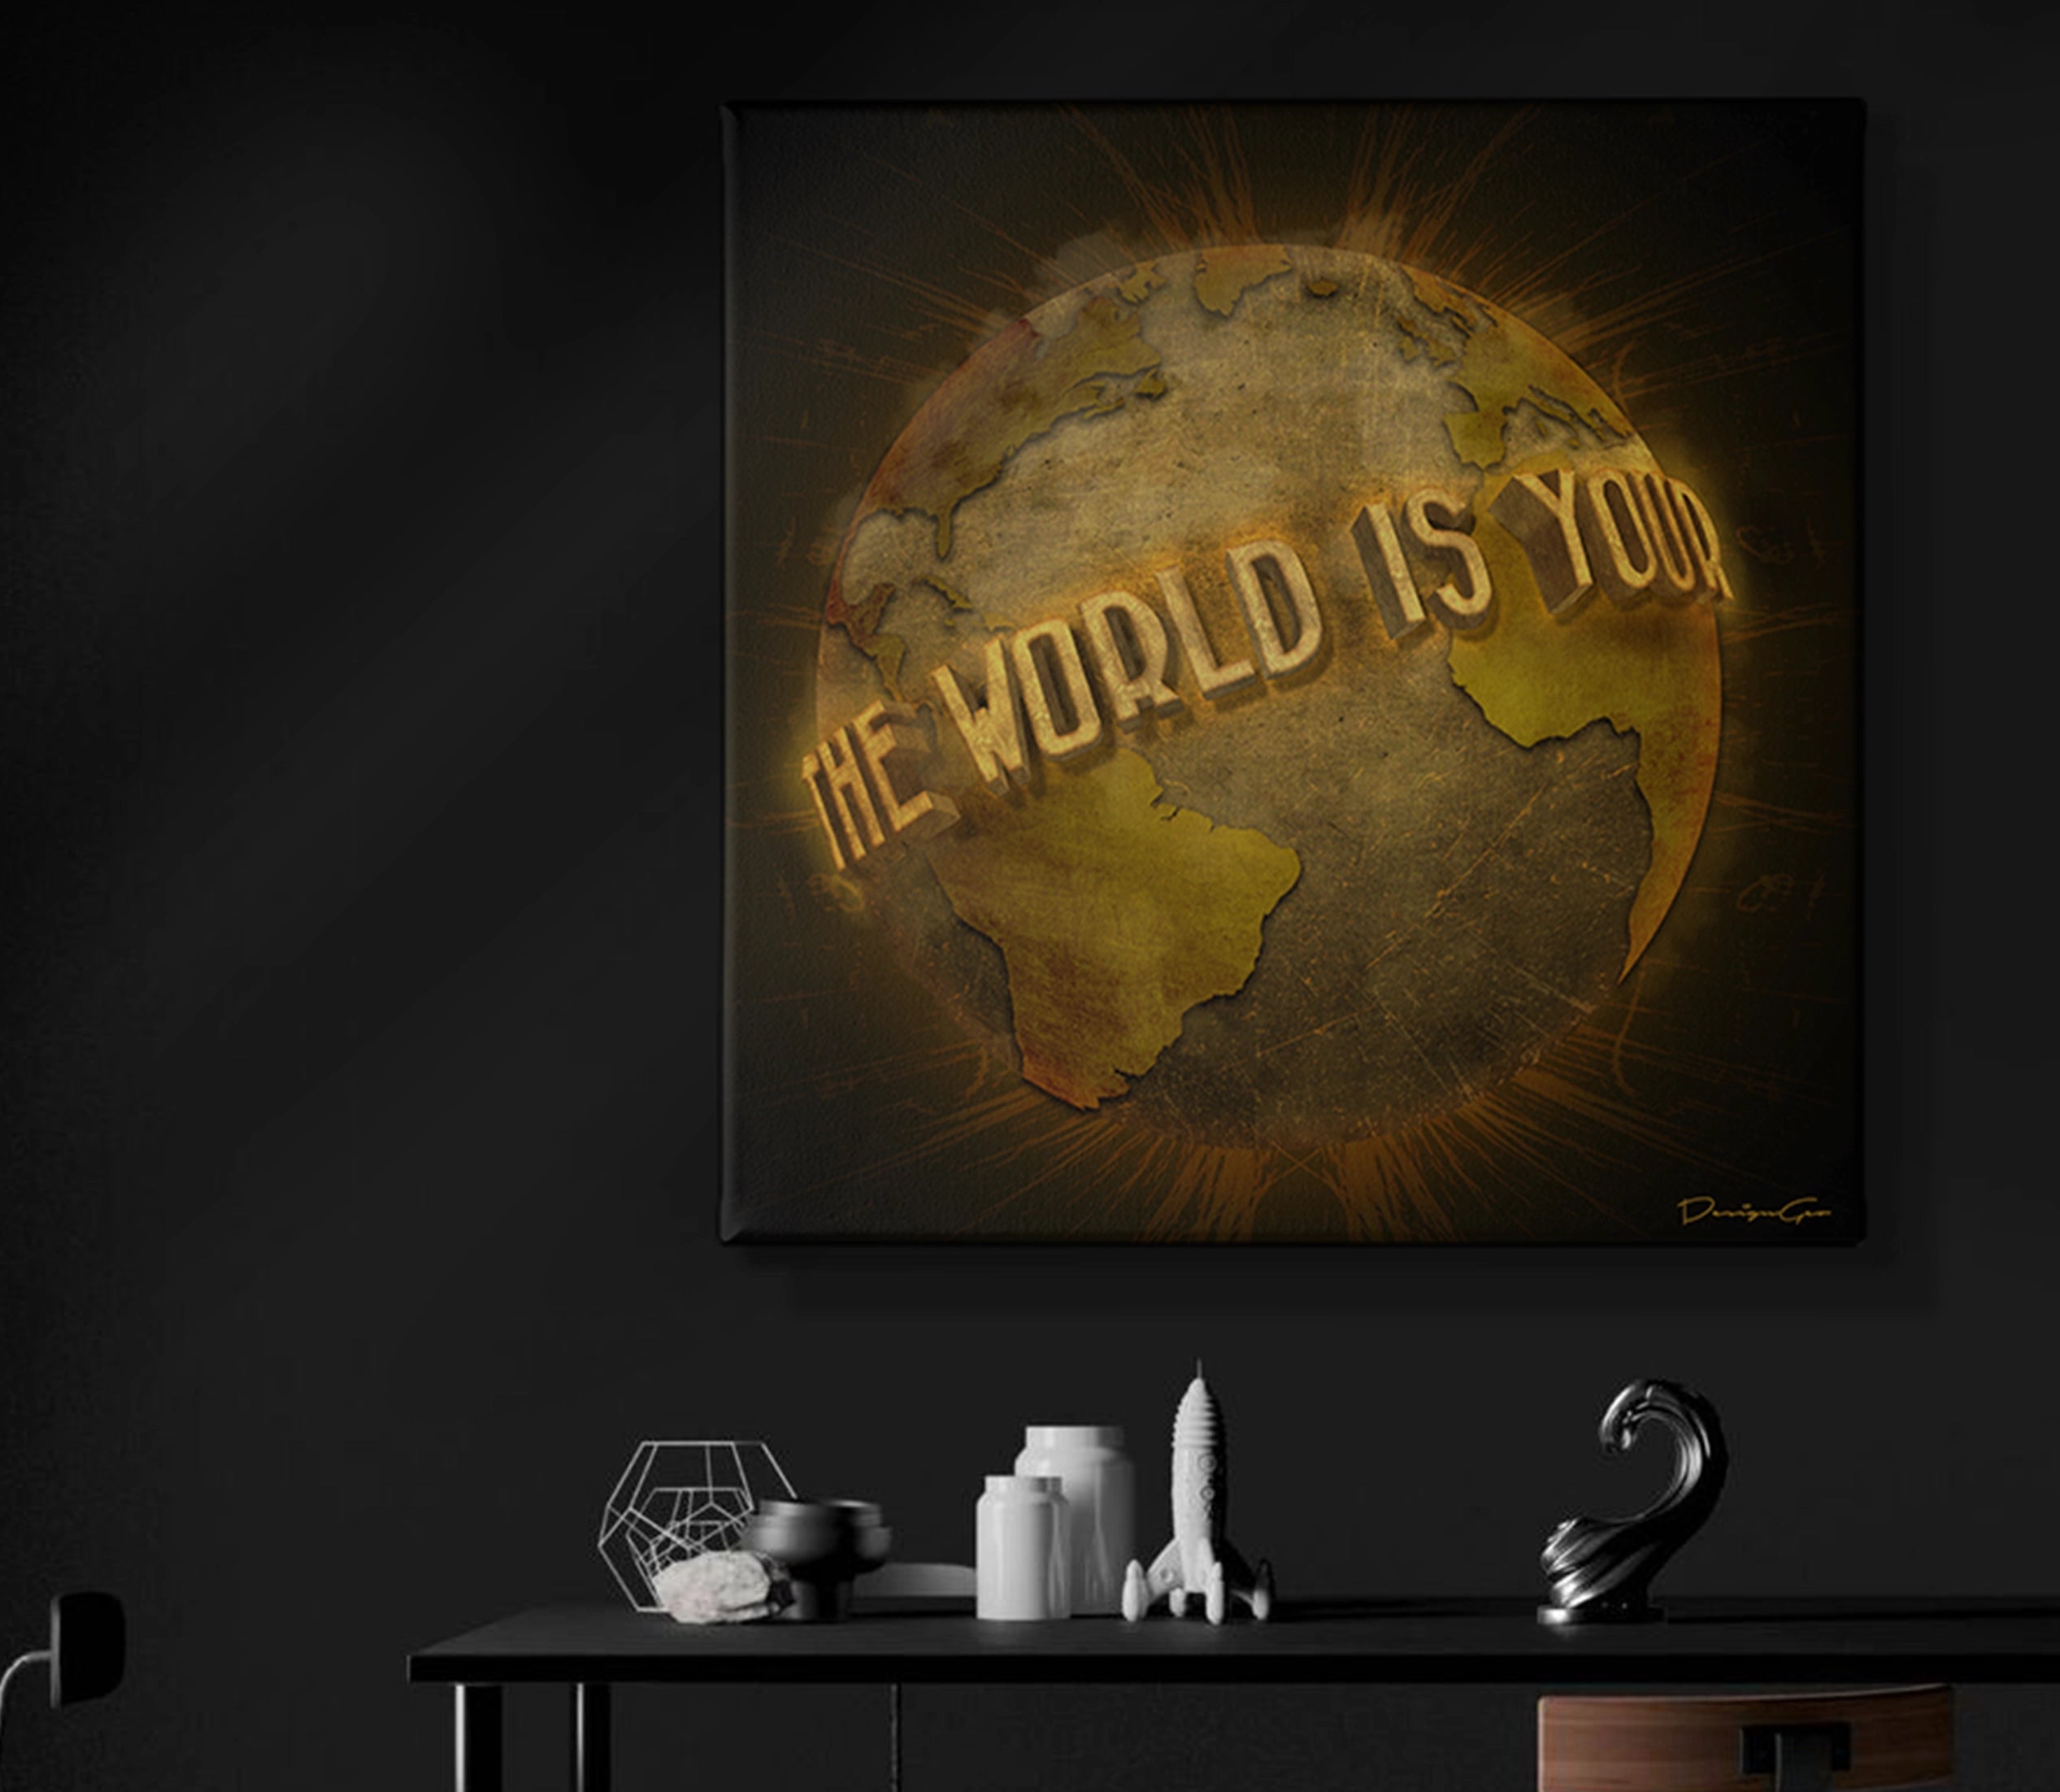 The world is yours motivational canvas print by DesignGeo